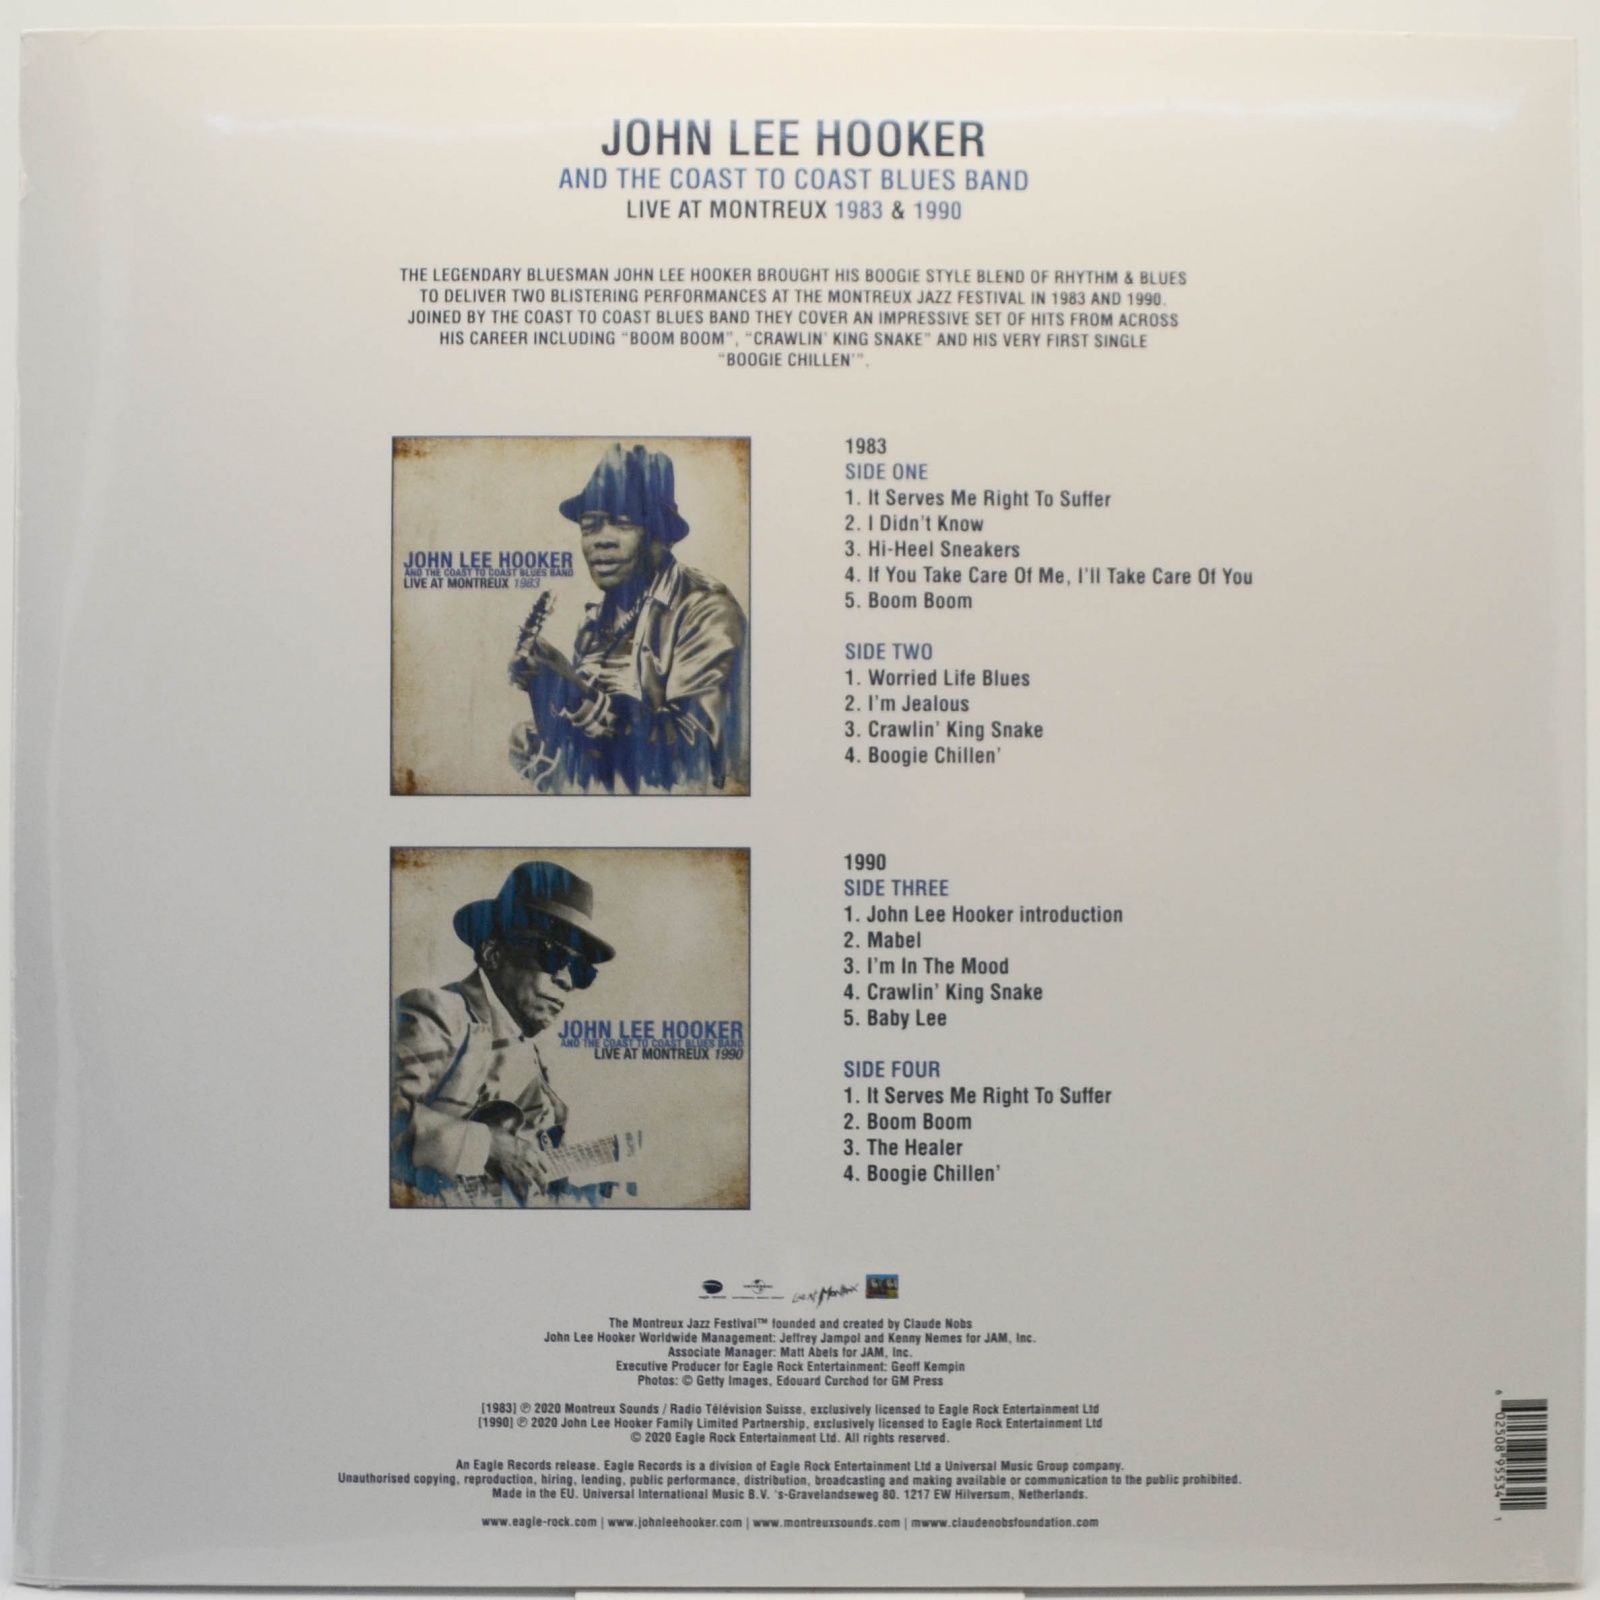 John Lee Hooker and The Coast To Coast Blues Band — Live At Montreux 1983 & 1990 (2LP), 2020